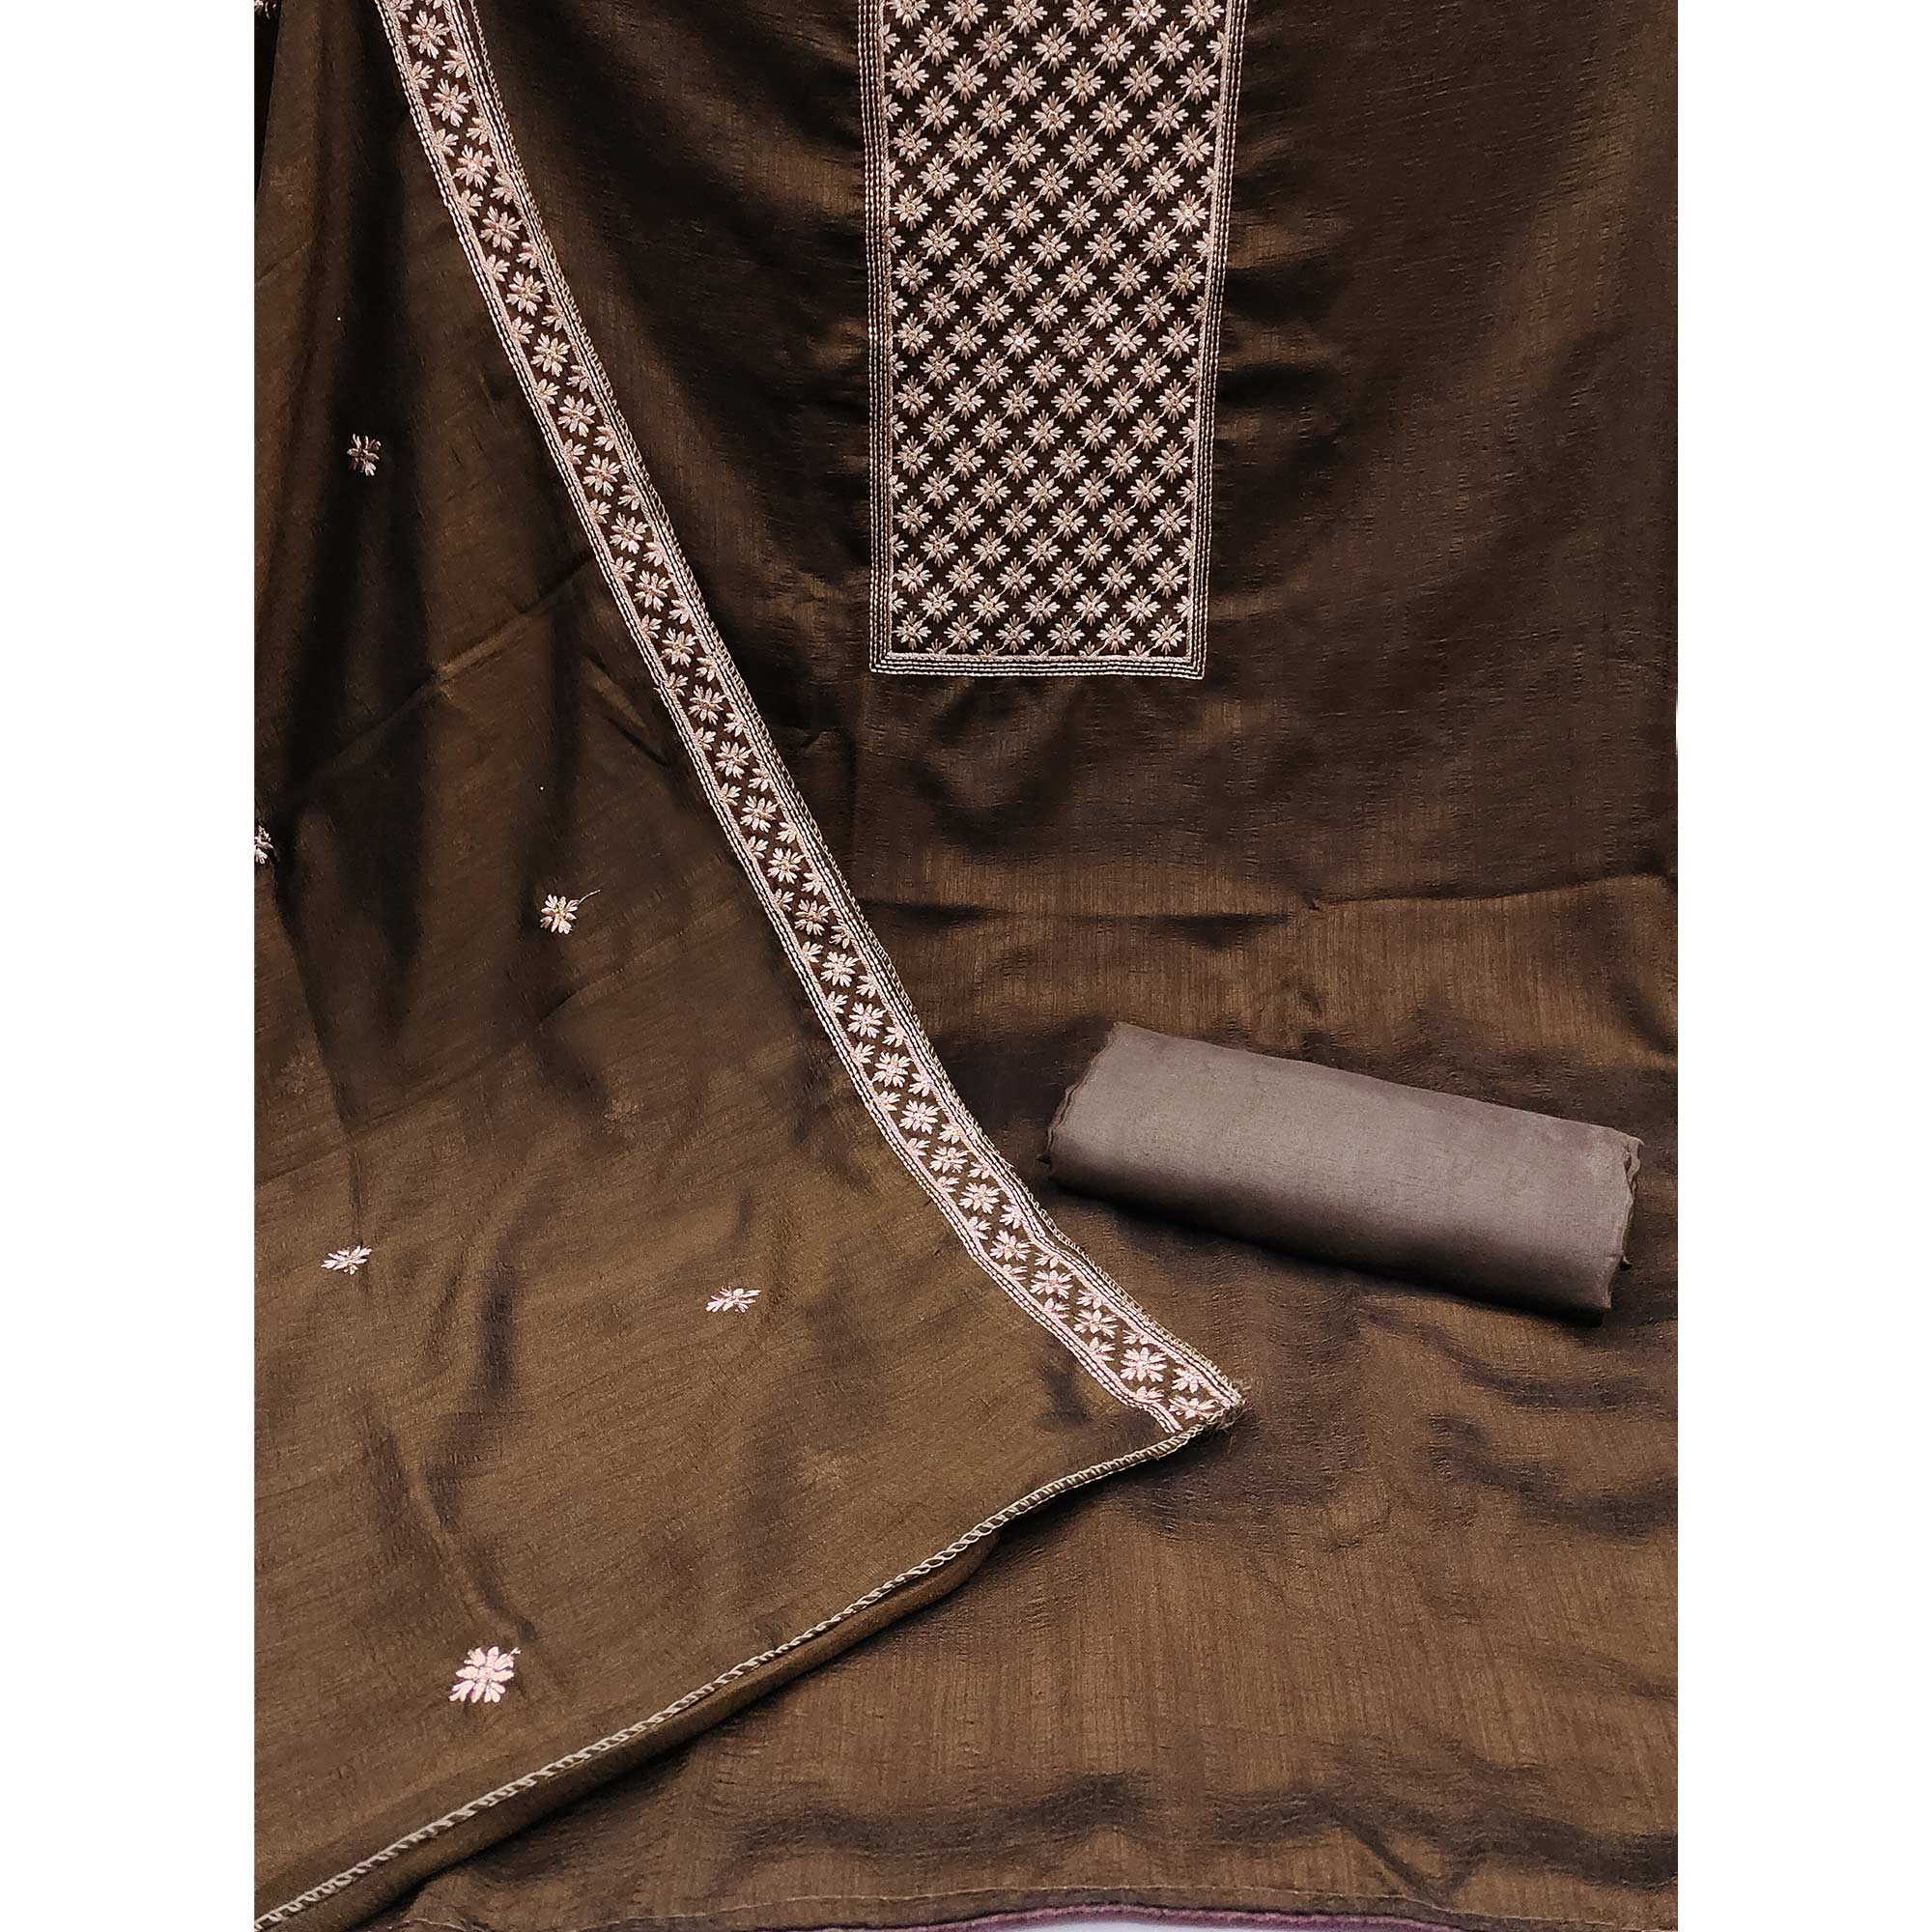 Coffee Brown Embroidered Modal Dress Material